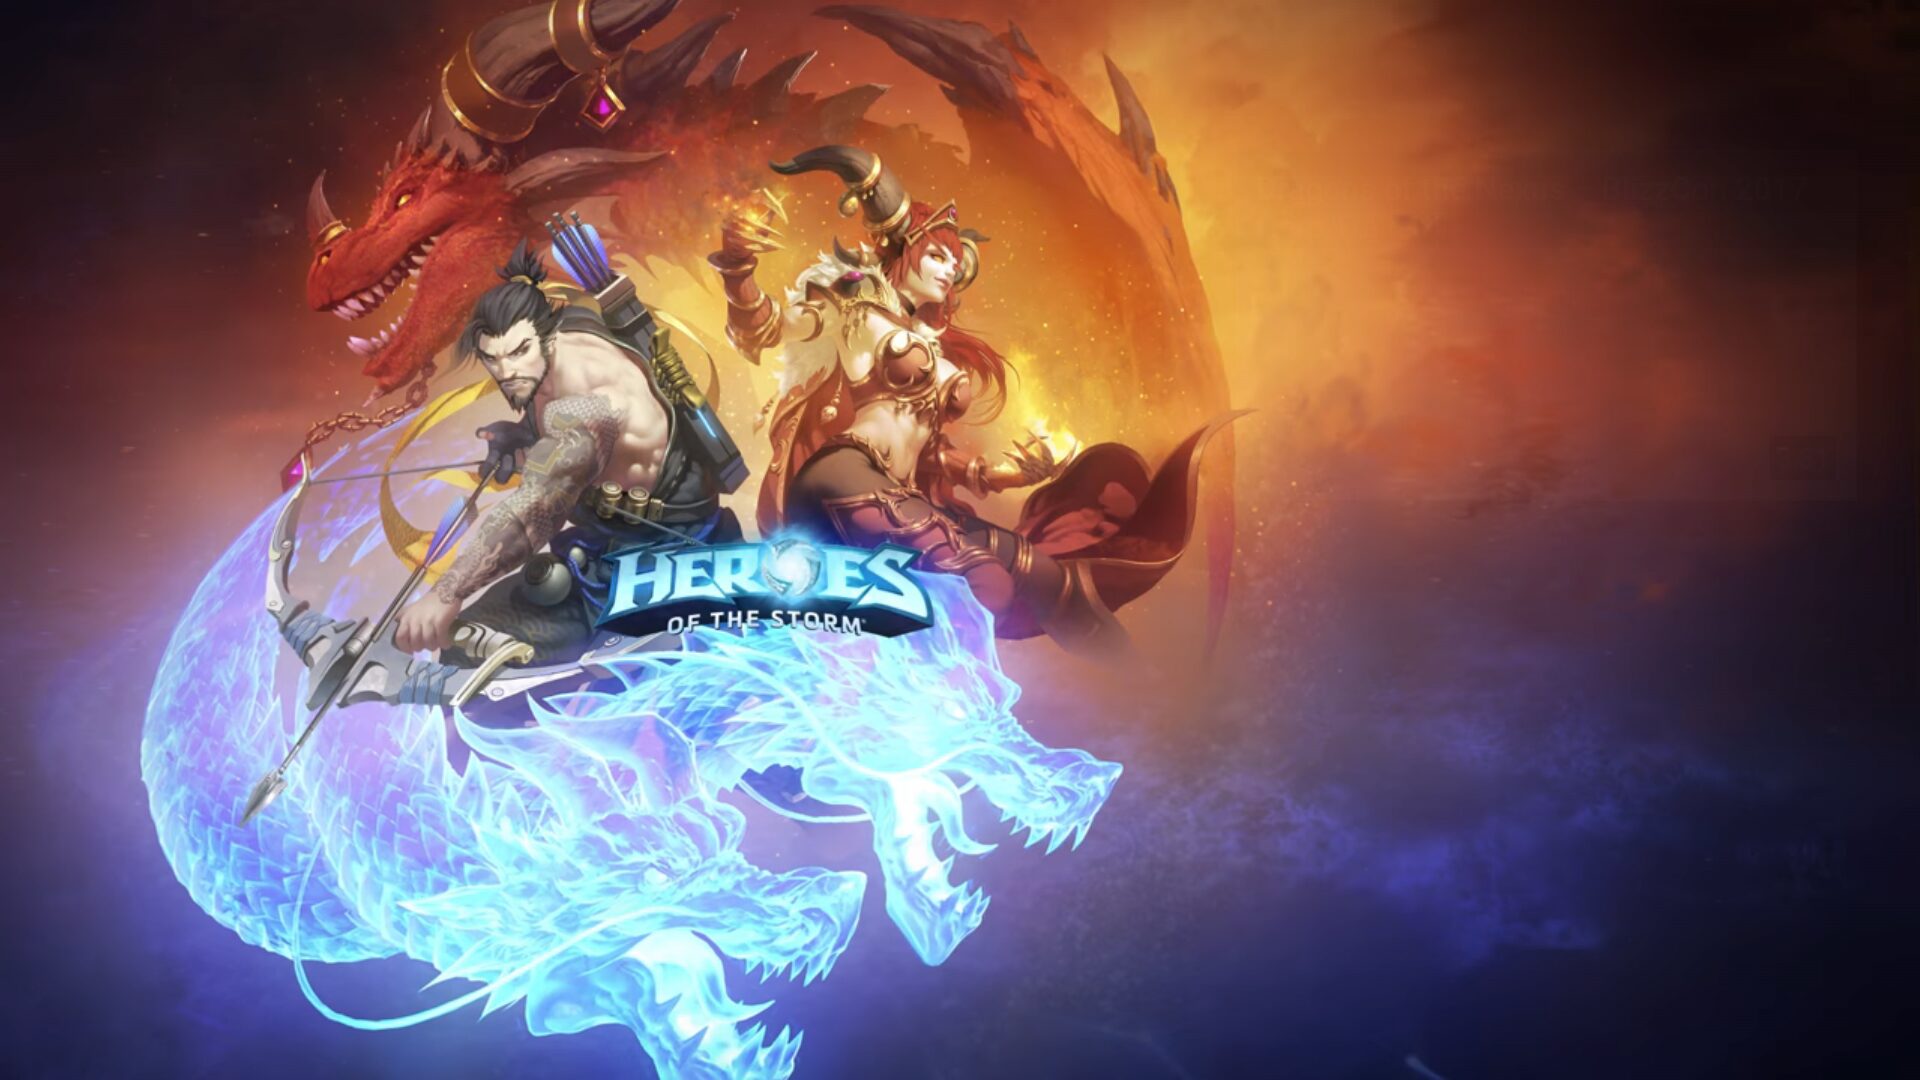 BlizzCon: Heroes of the Storm “Dragons of the Nexus”